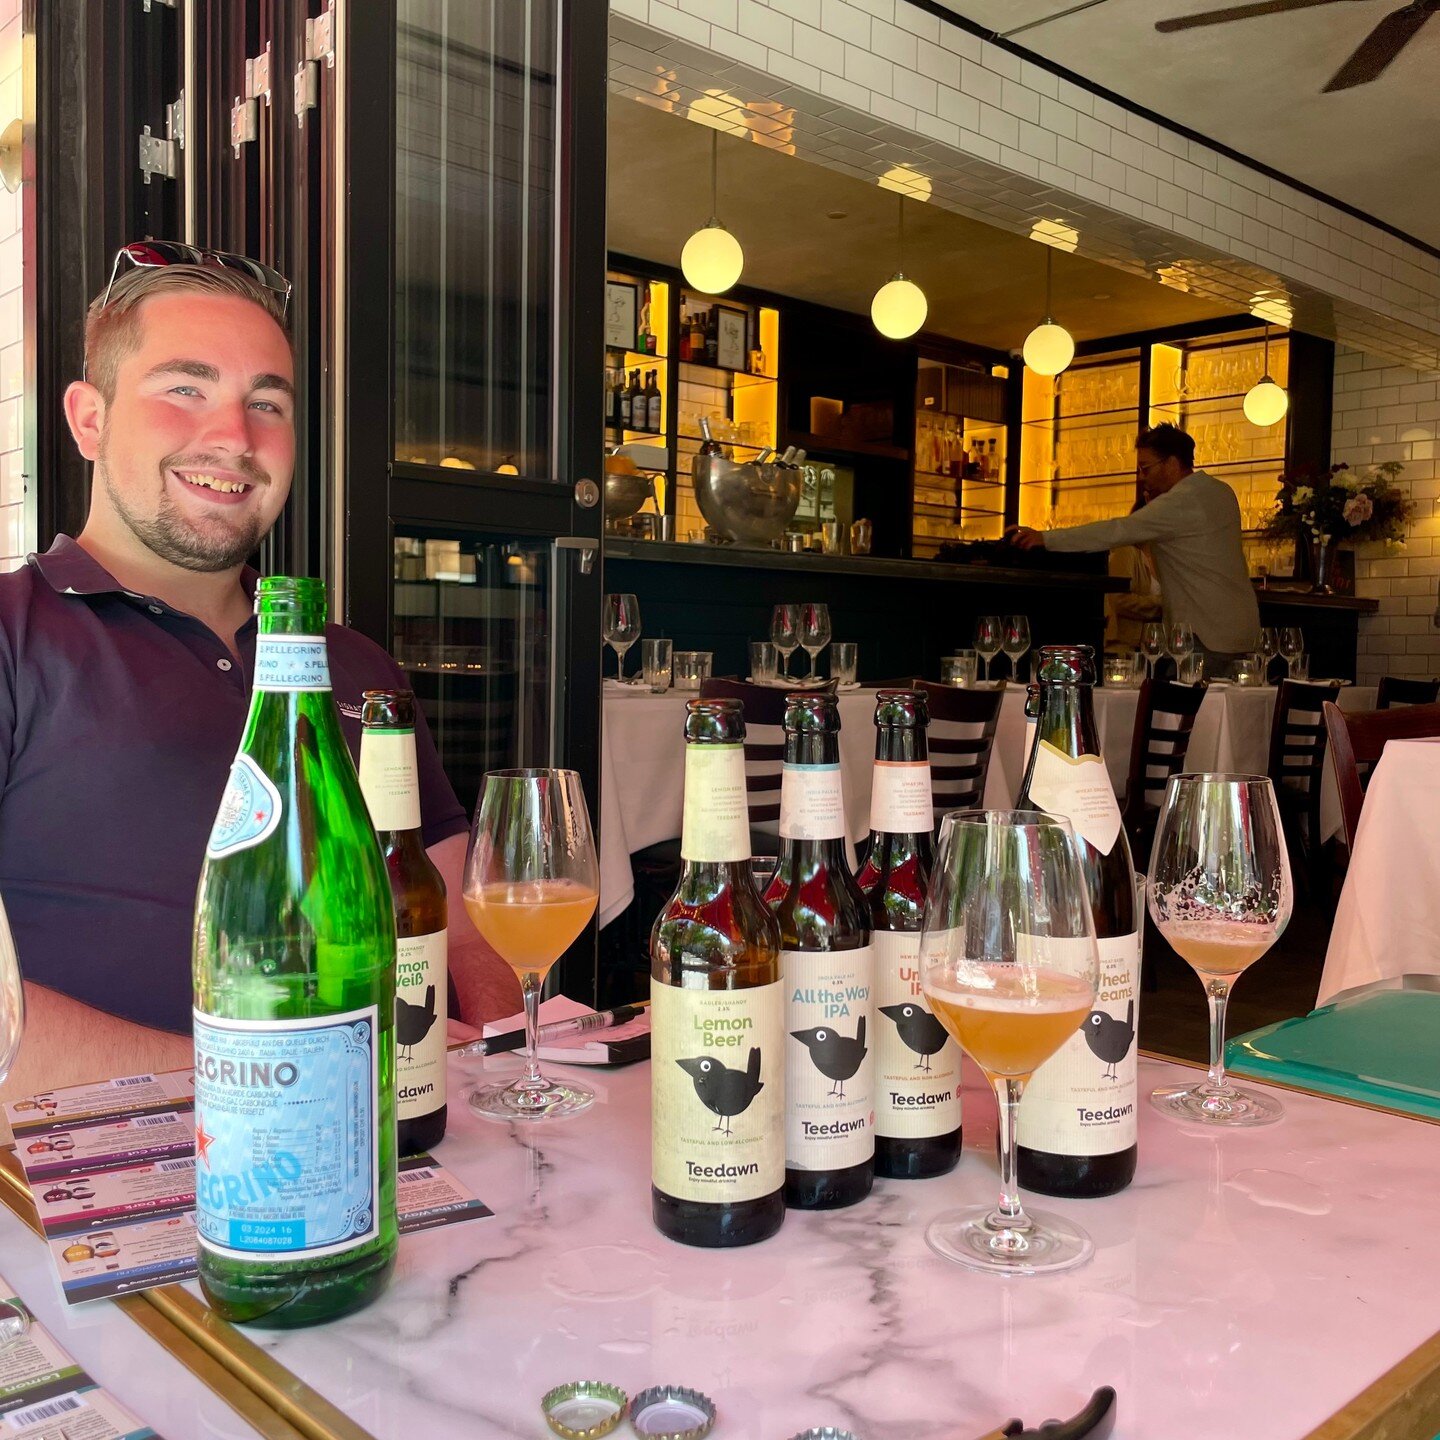 Master-tasting at Bistro Pastis in order to find new flavours for the best, french menu in Copenhagen. 
#bistropastis #teedawn #nolo #frenchgourmet #beer #nonalcoholic #lowalcoholic